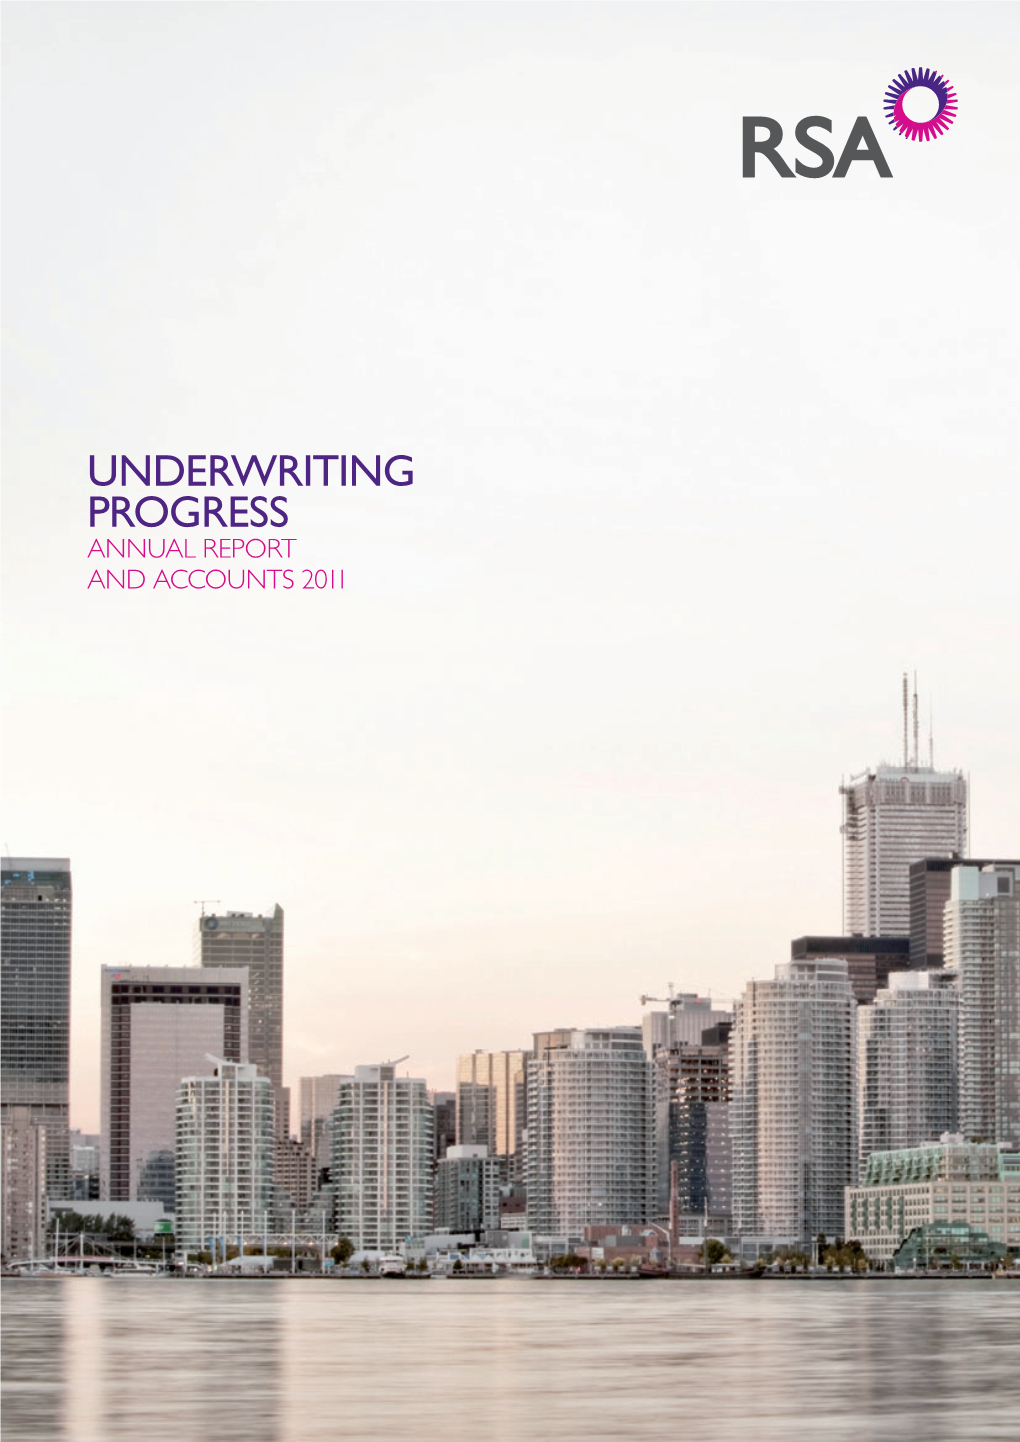 Underwriting Progress Annual Report and Accounts 2011 2011 Highlights